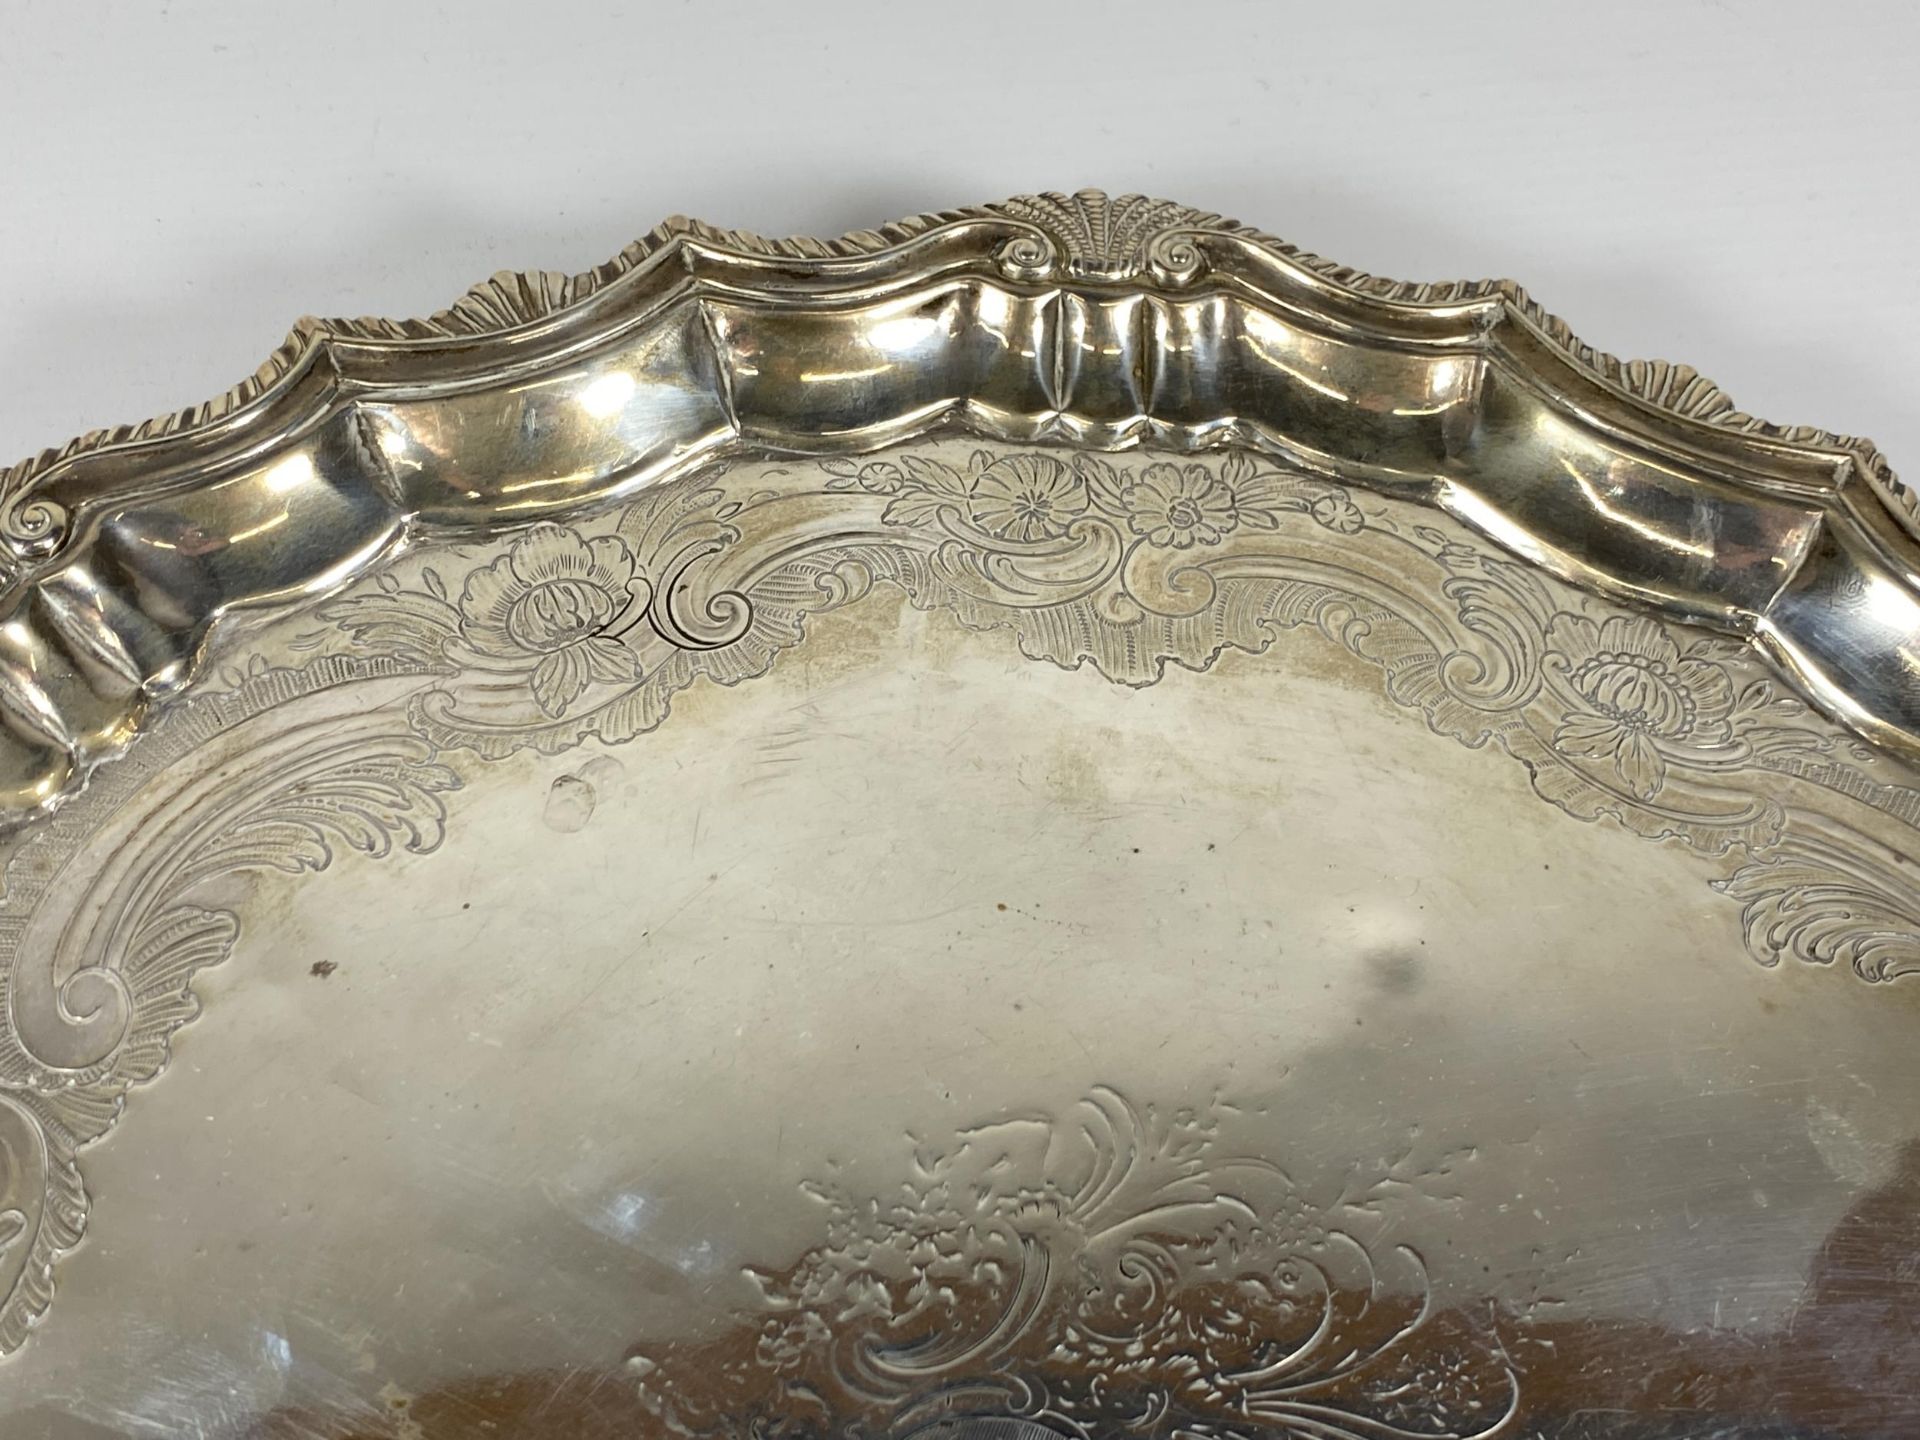 A GEORGE II SILVER SALVER BY DOROTHY MILLS, HALLMARKS FOR LONDON 1753, DIAMETER 33CM, WEIGHT 836G - Image 4 of 8